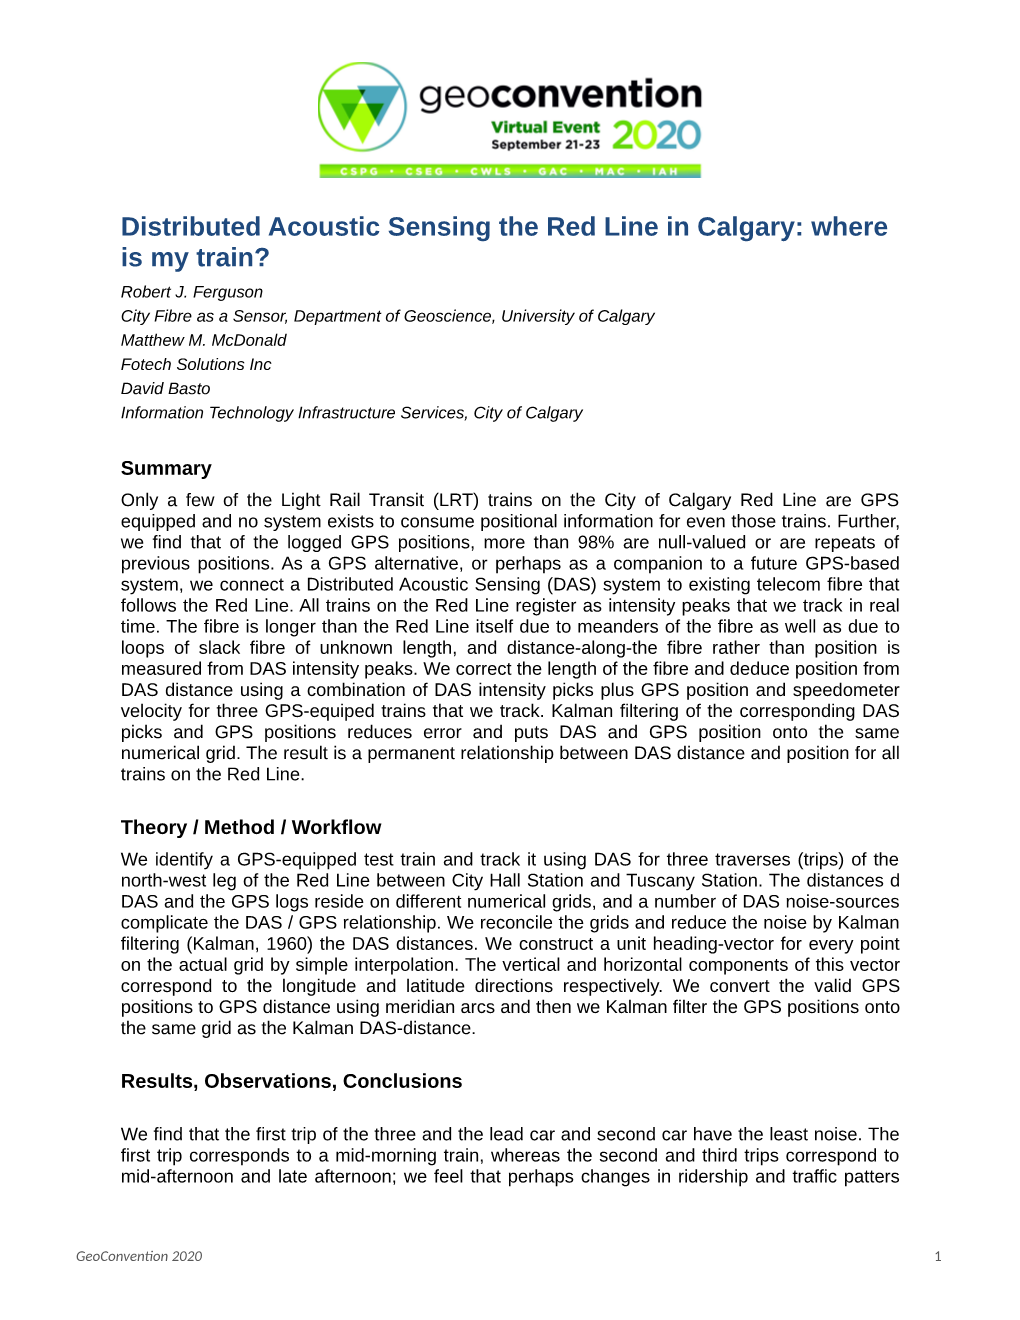 Distributed Acoustic Sensing the Red Line in Calgary: Where Is My Train? Robert J